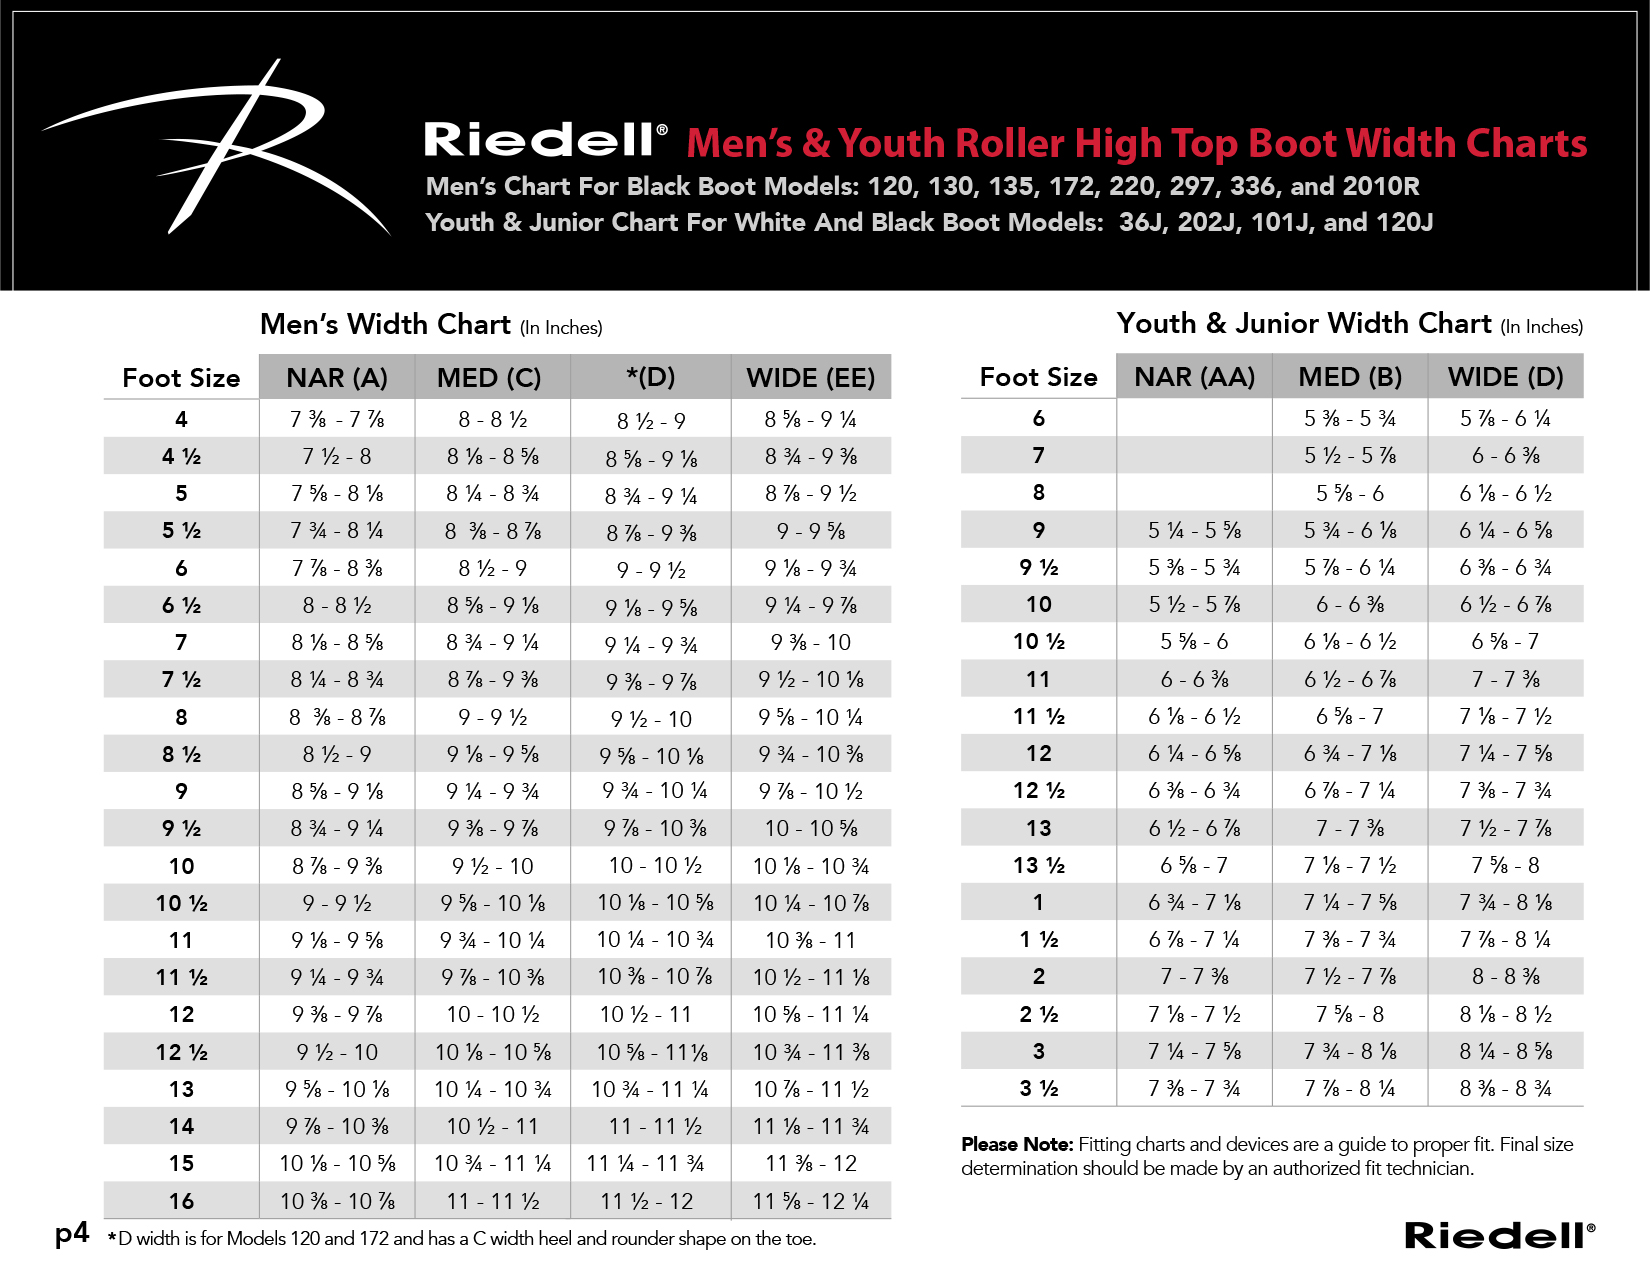 riedell-roller-sizing-guide-high-top-boots-page-4.jpg